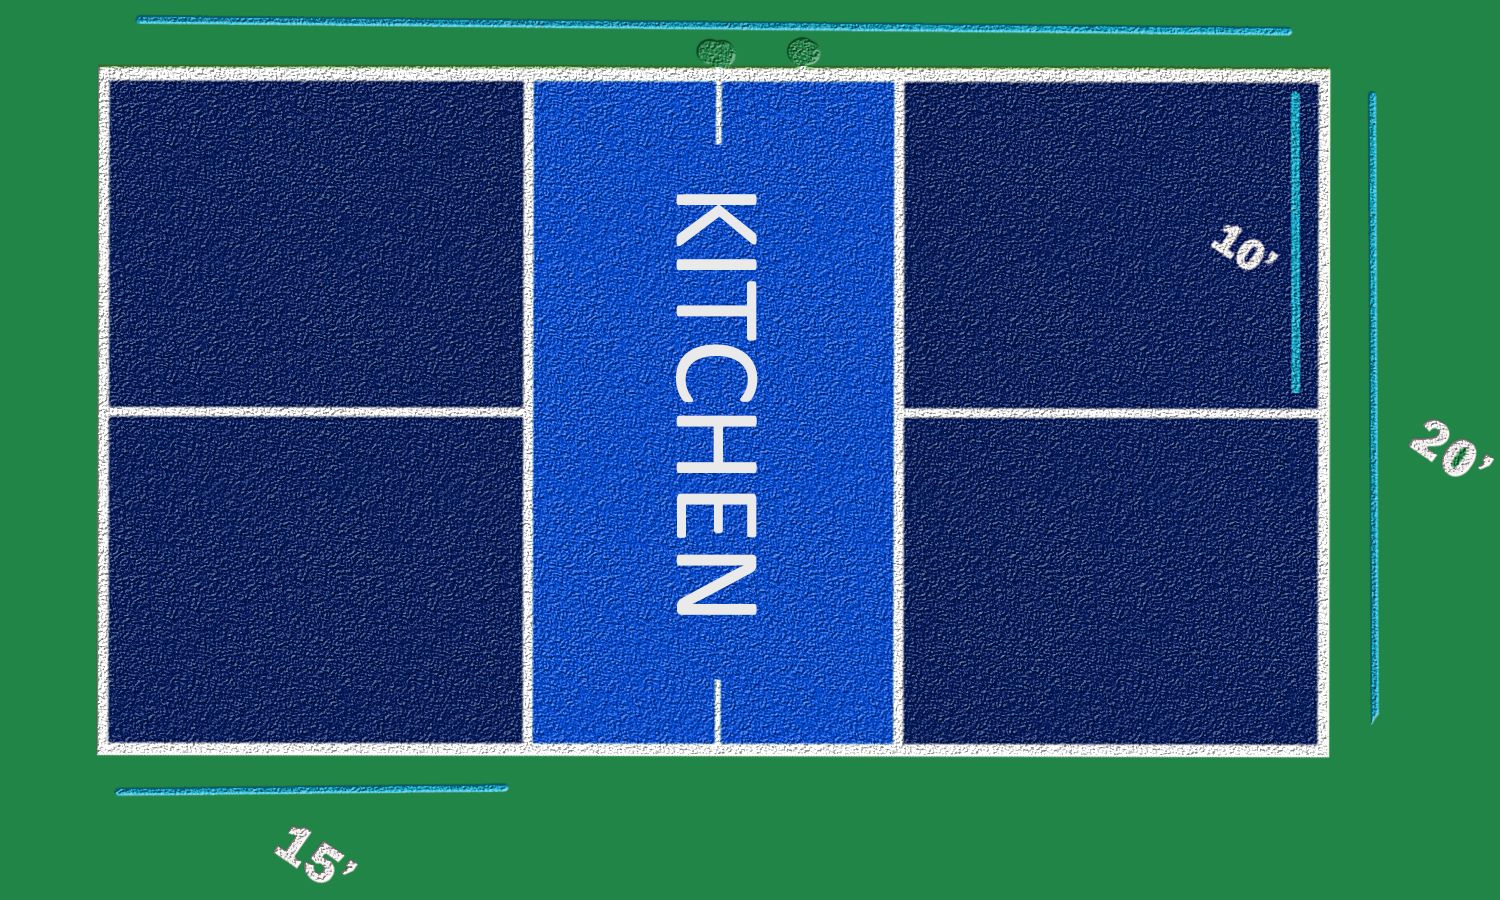 Pickleball Net Height – What the Rulebook Says